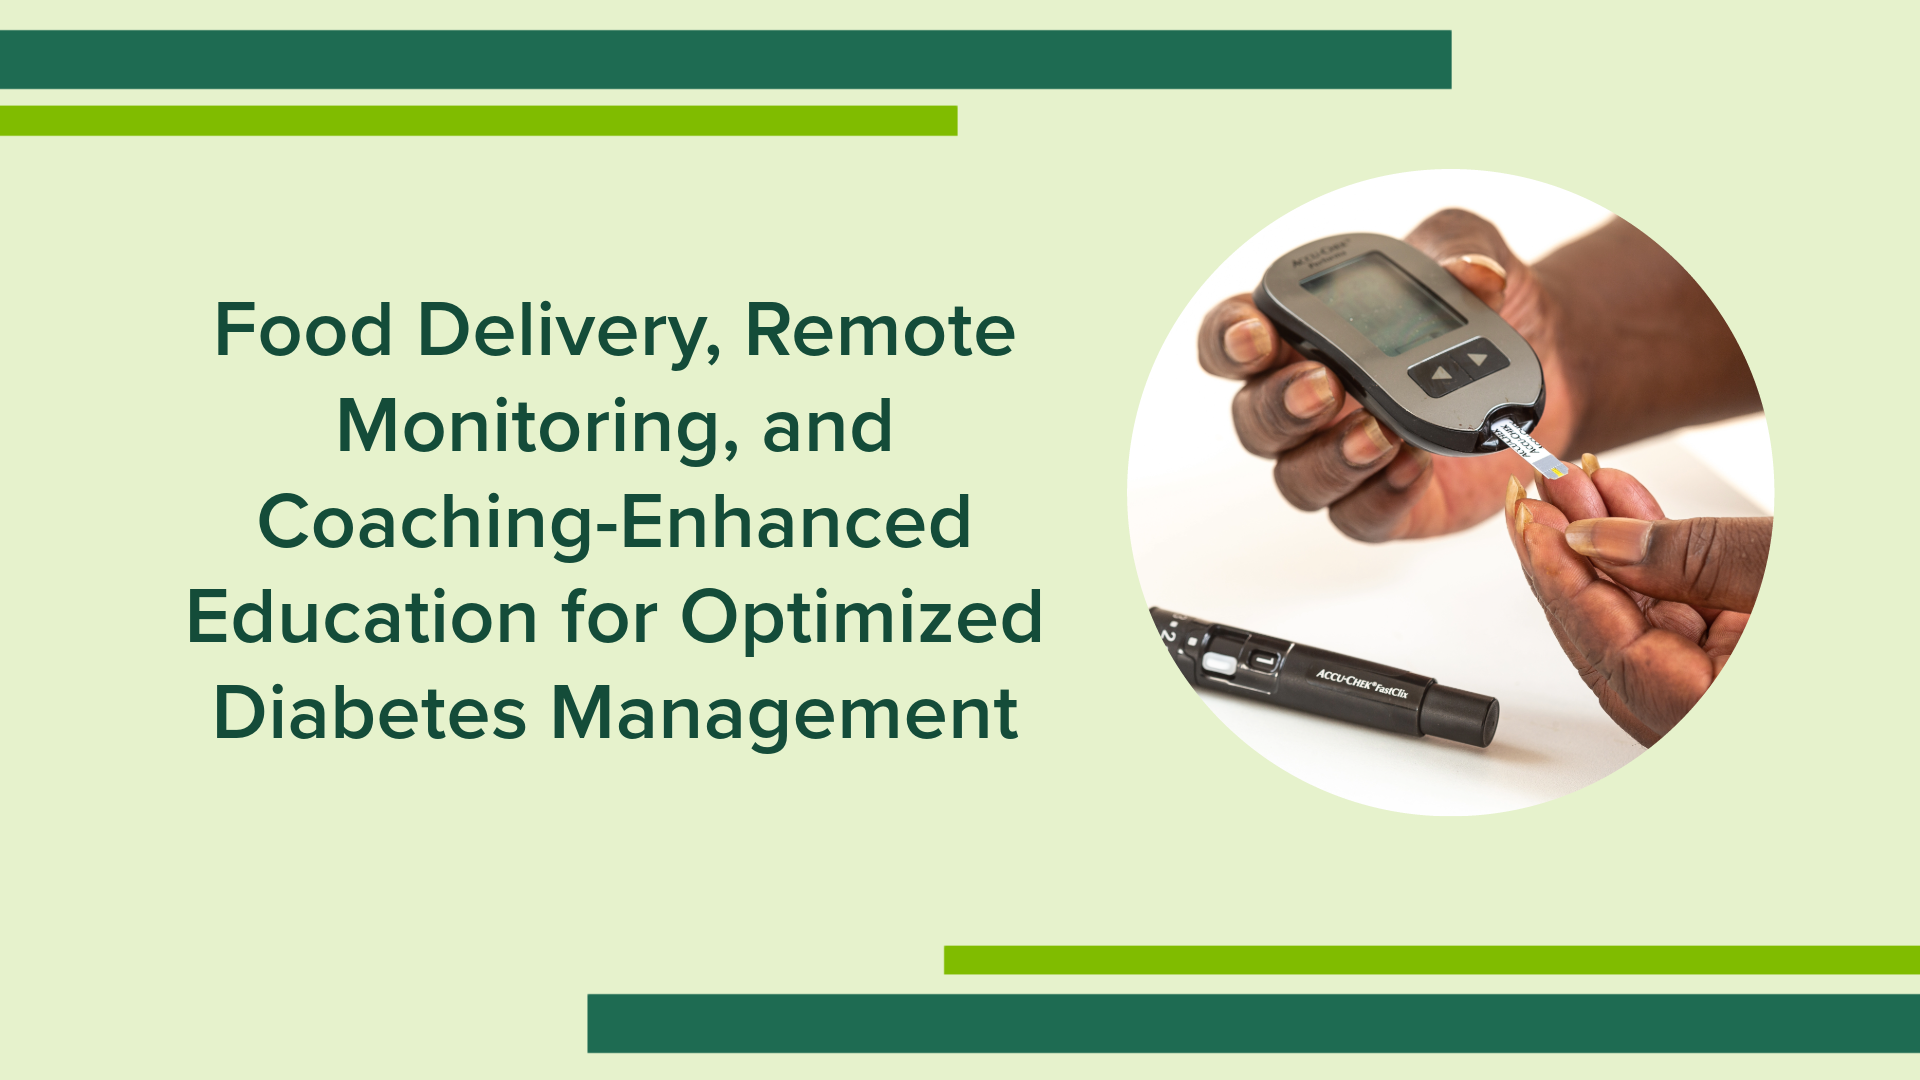 Food Delivery, Remote Monitoring, and Coaching-Enhanced Education for Optimized Diabetes Management